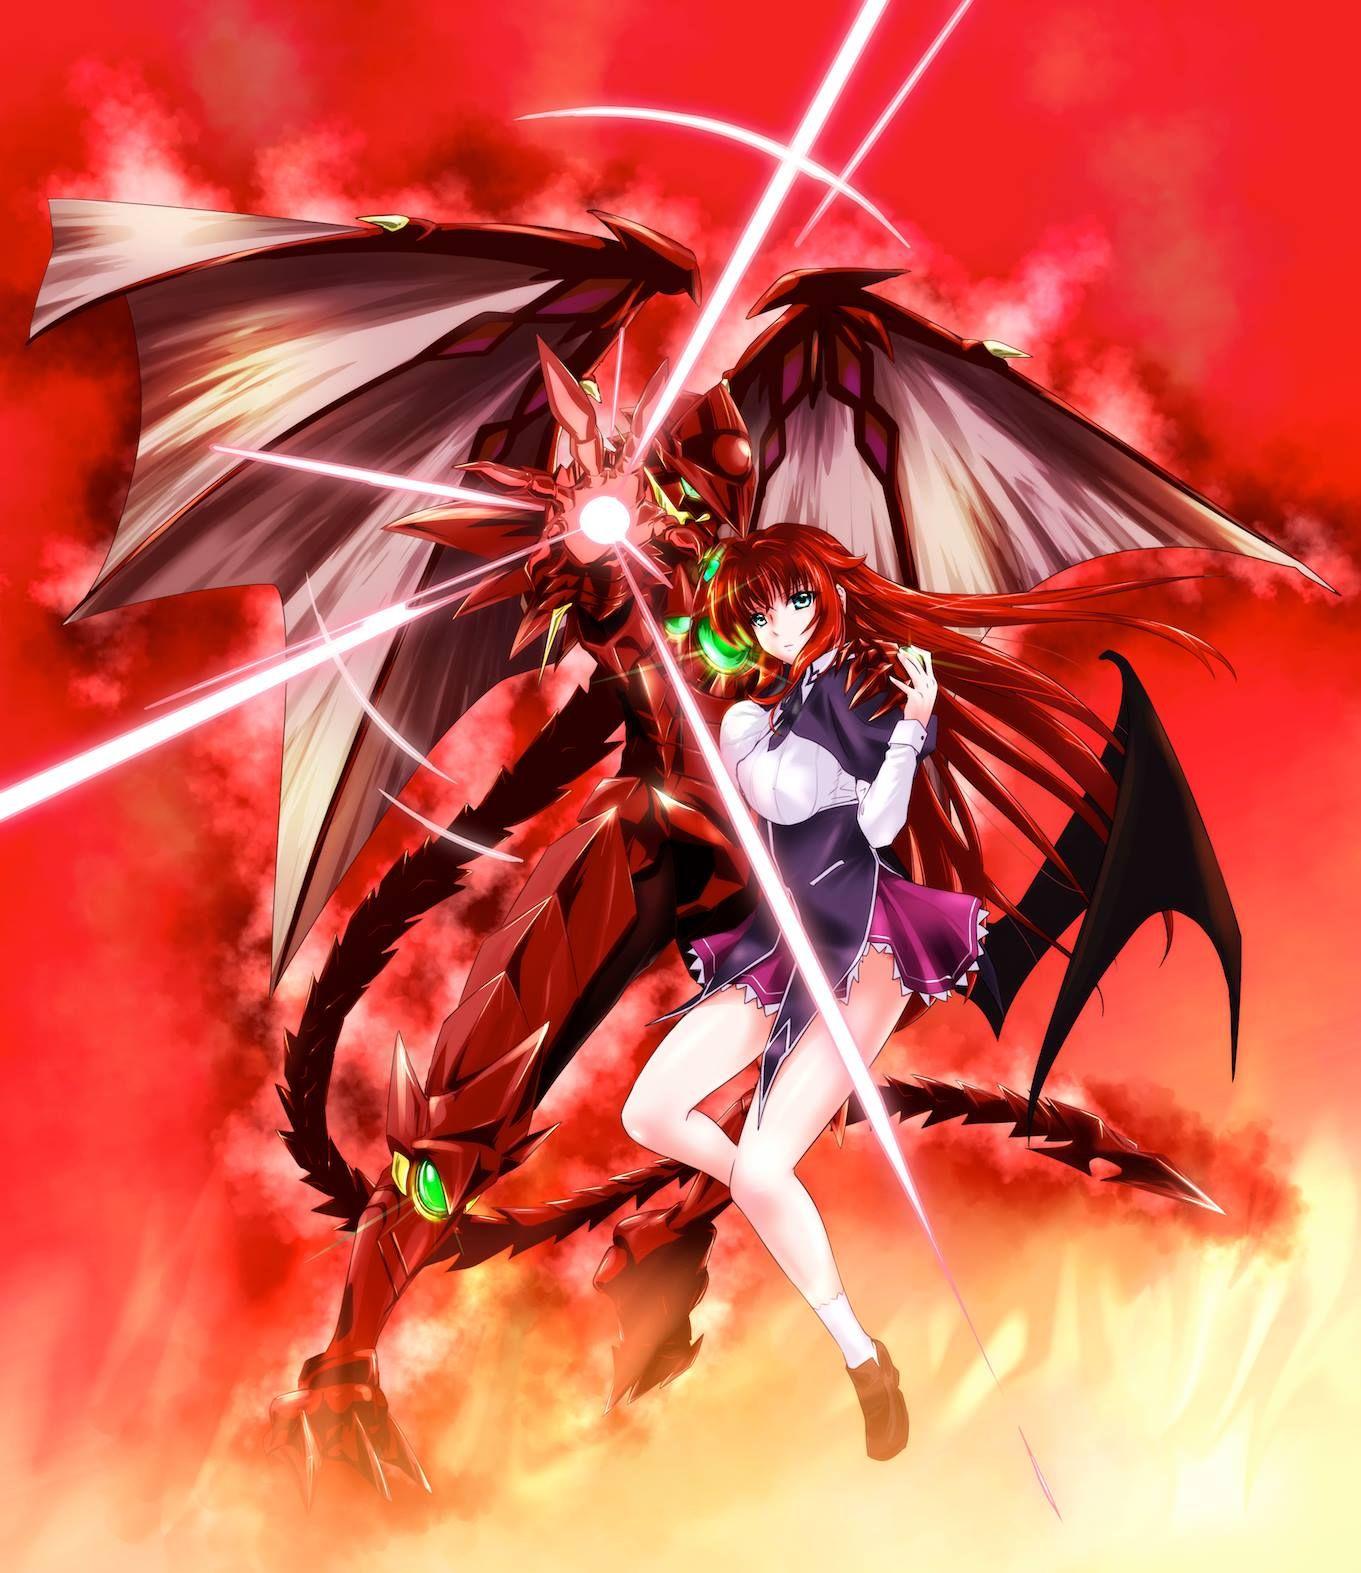 The Red Dragon Emperor & The Crimson Haired Empress. Anime High